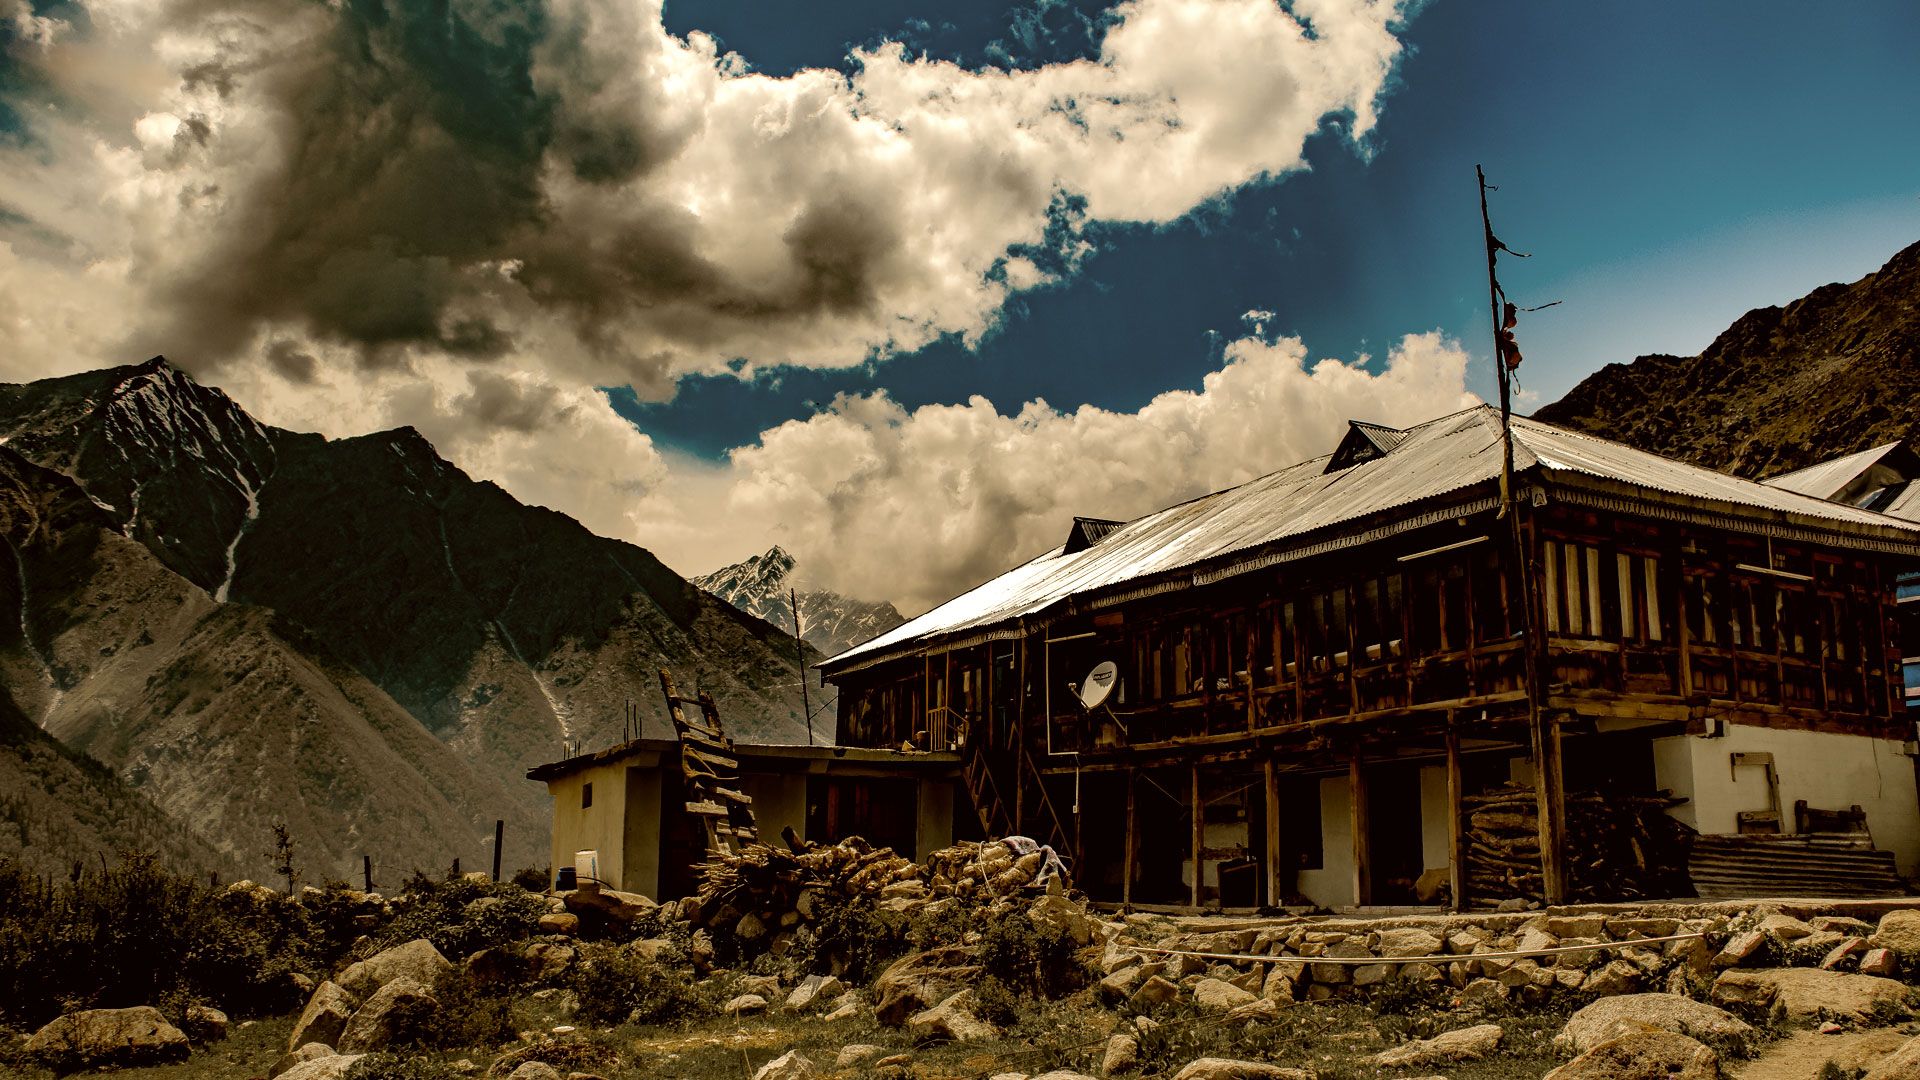 Welcome to Chitkul